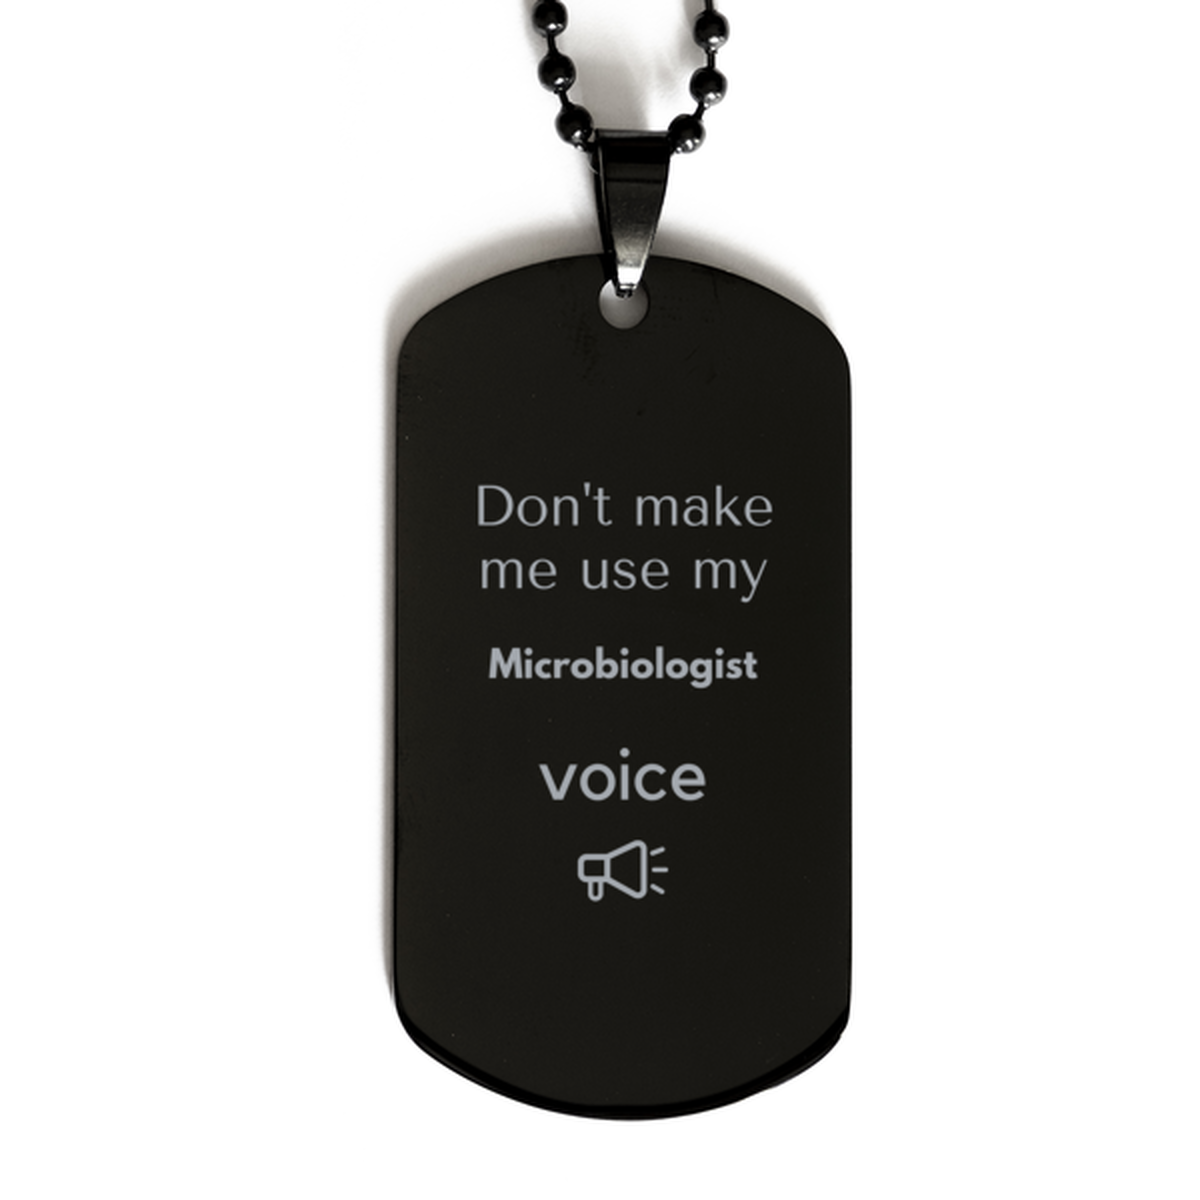 Don't make me use my Microbiologist voice, Sarcasm Microbiologist Gifts, Christmas Microbiologist Black Dog Tag Birthday Unique Gifts For Microbiologist Coworkers, Men, Women, Colleague, Friends